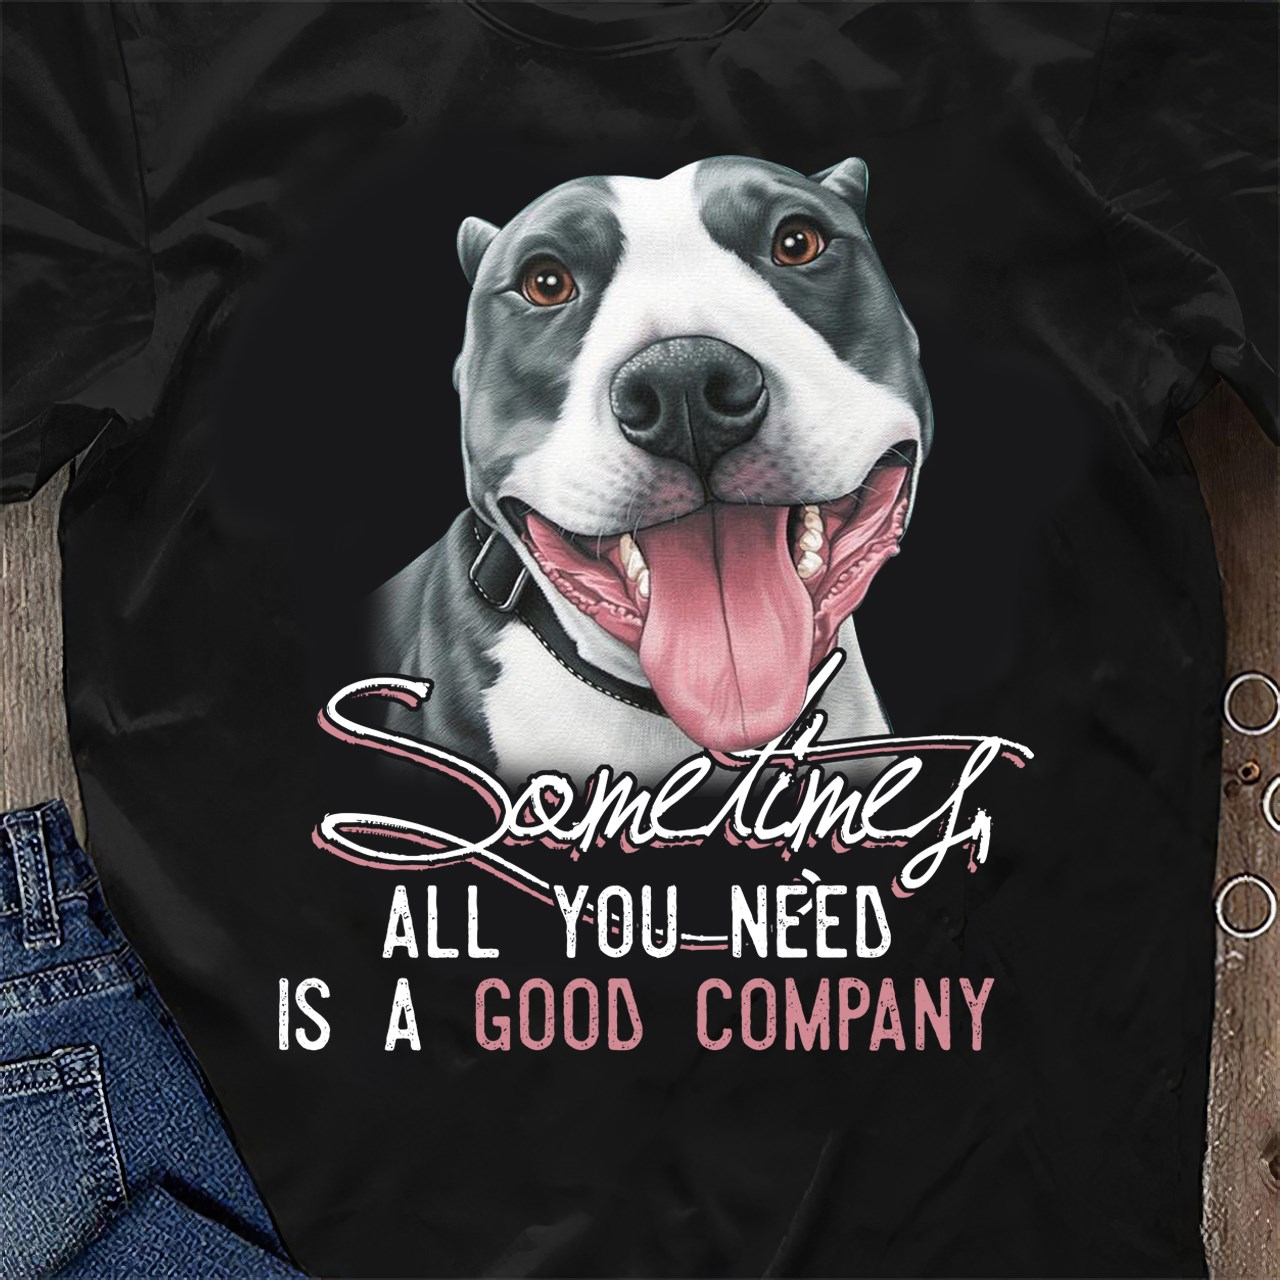 Sometimes all you need is a good company - Pitbull dog